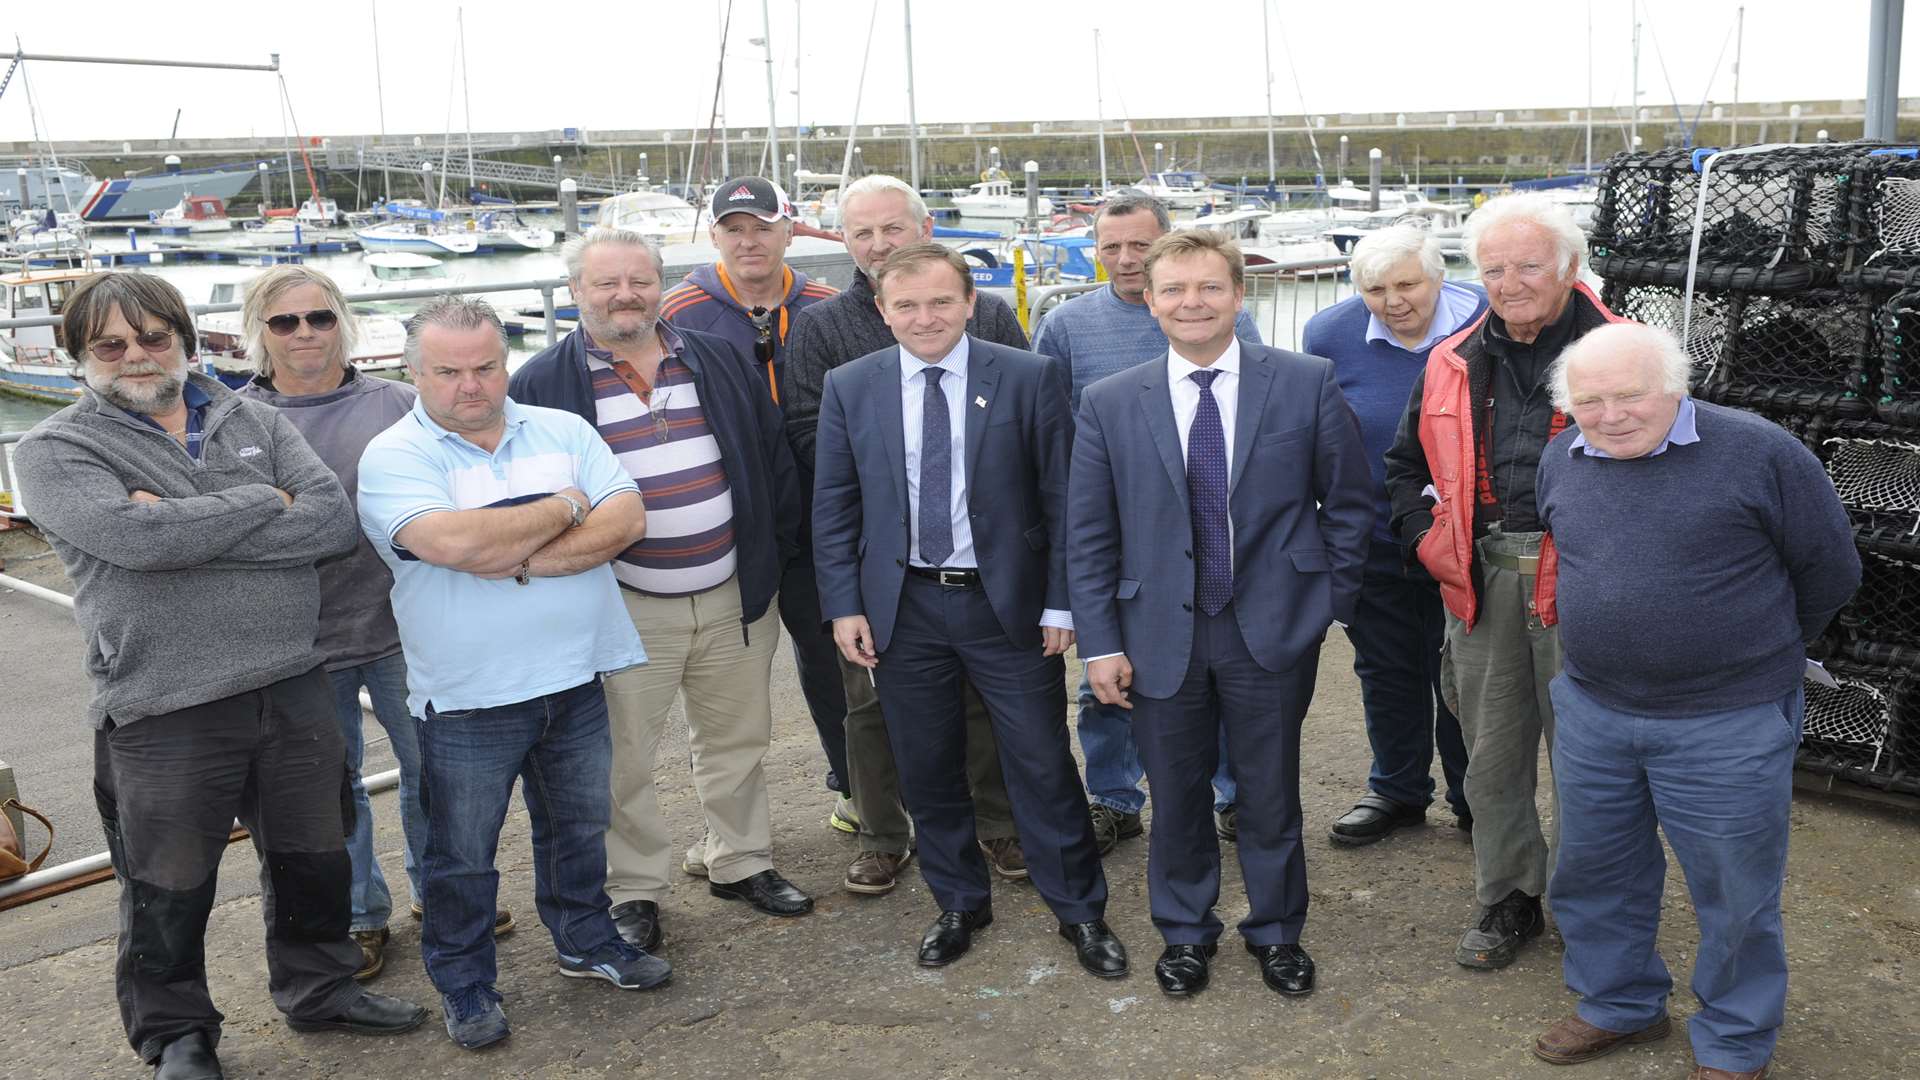 Mr Mackinlay and Mr Eustice spoke with fisherman about why leaving the EU would be better for them